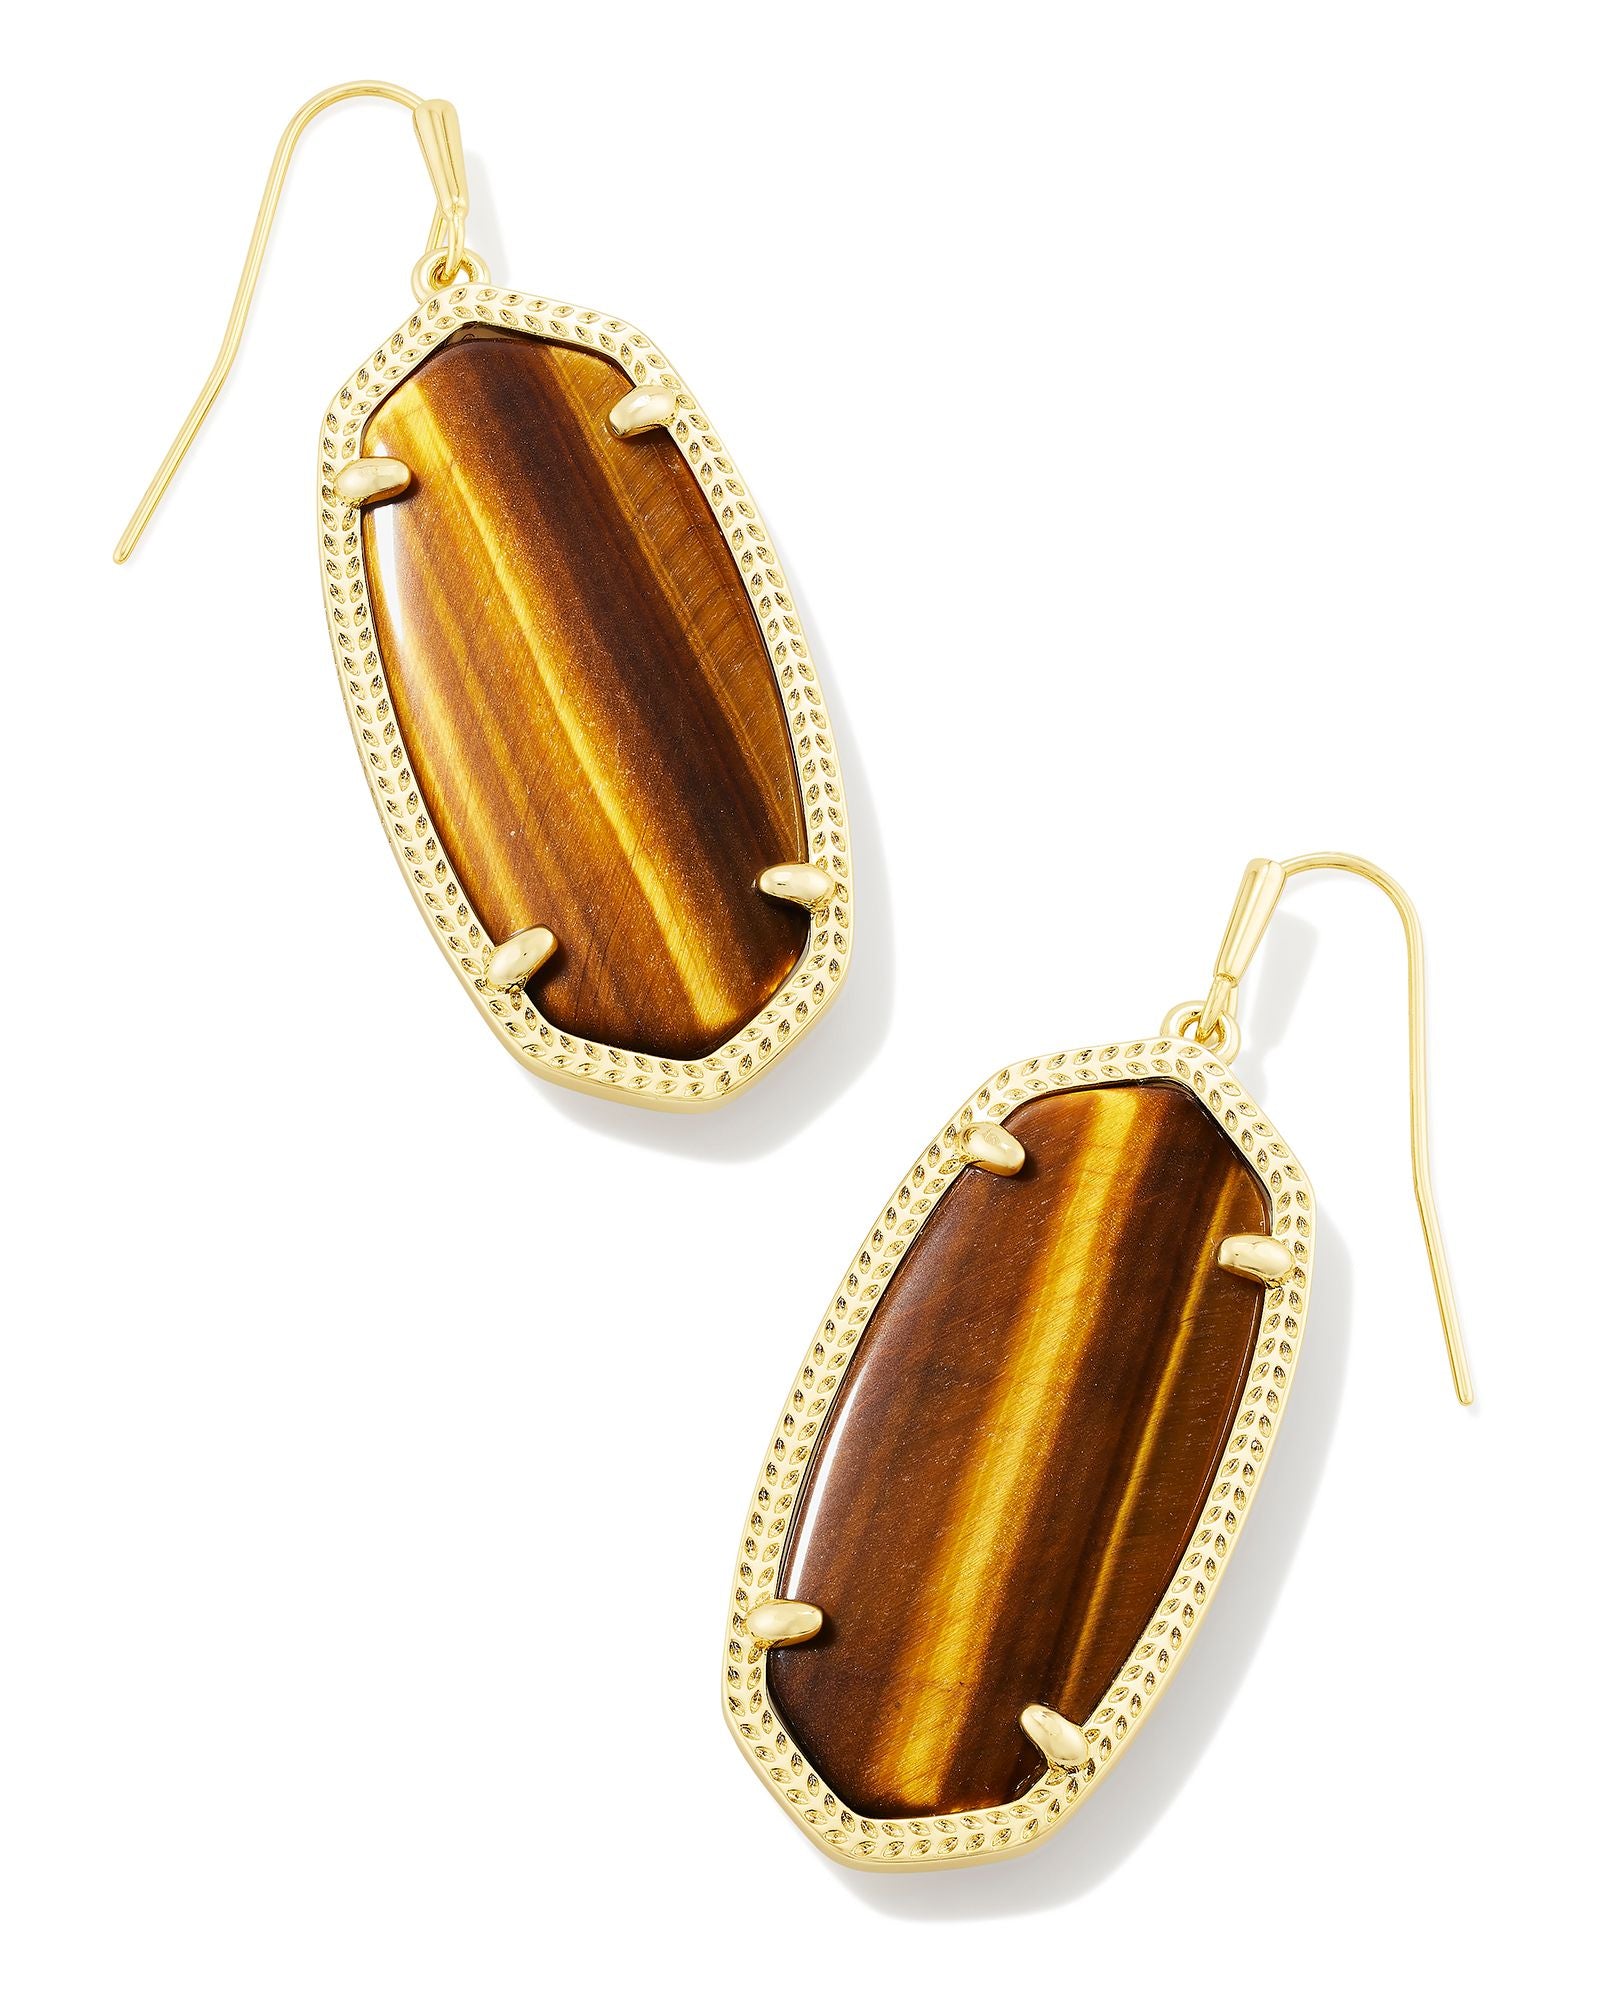 Kendra Scott Elle Oval Dangle Earrings in Brown Tigers Eye and Gold Plated